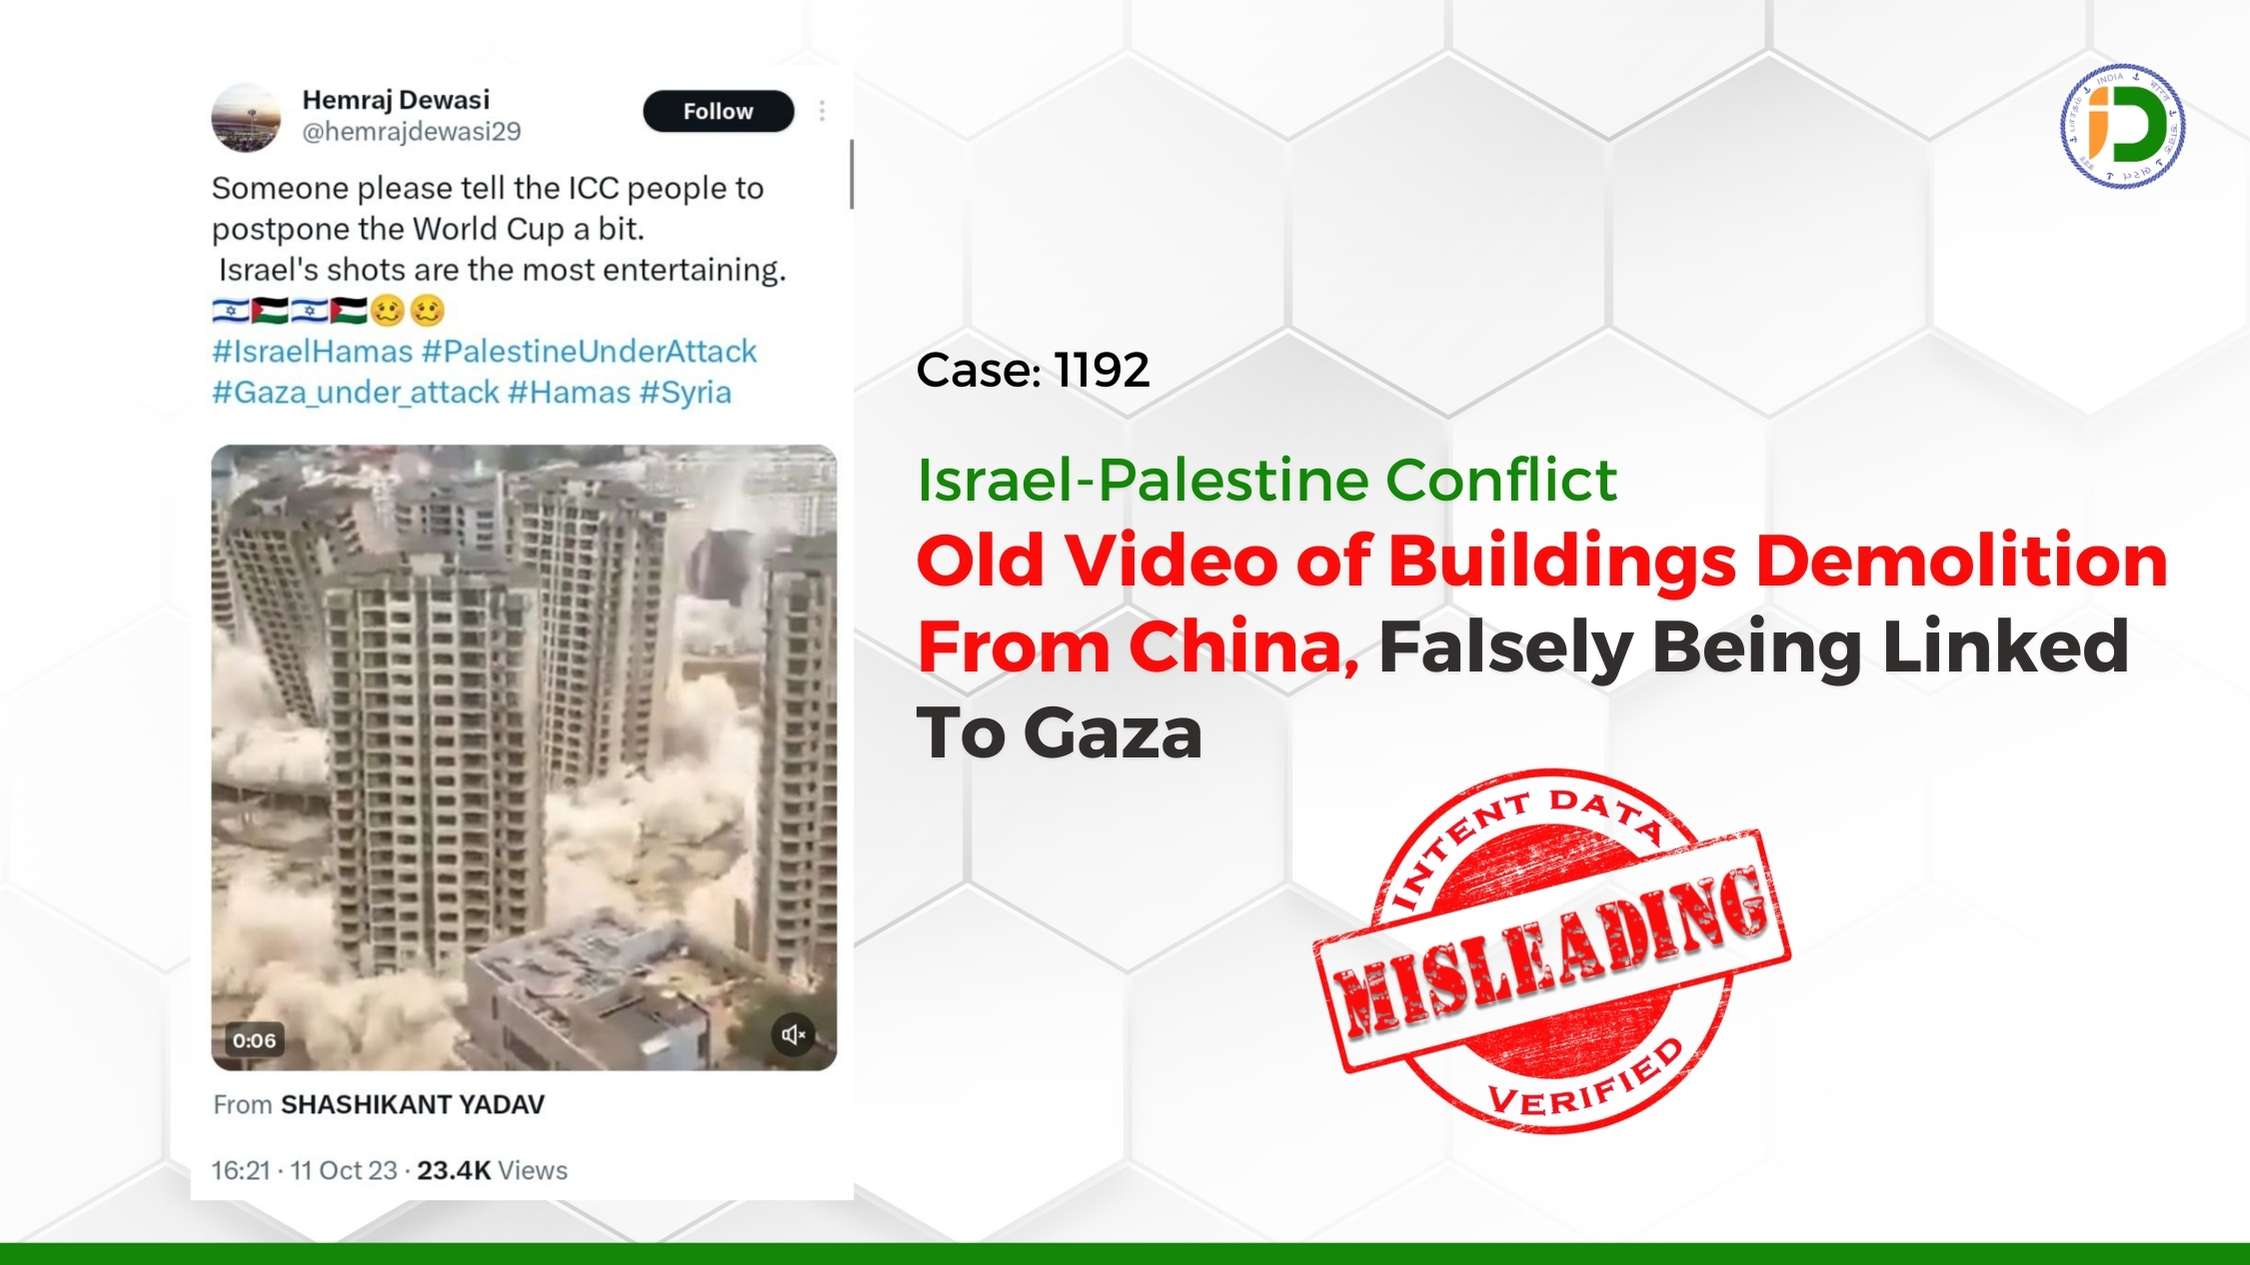 Israel-Palestine Conflict — Old Video of Buildings Demolition From China, Falsely Being Linked To Gaza: Fact-Check